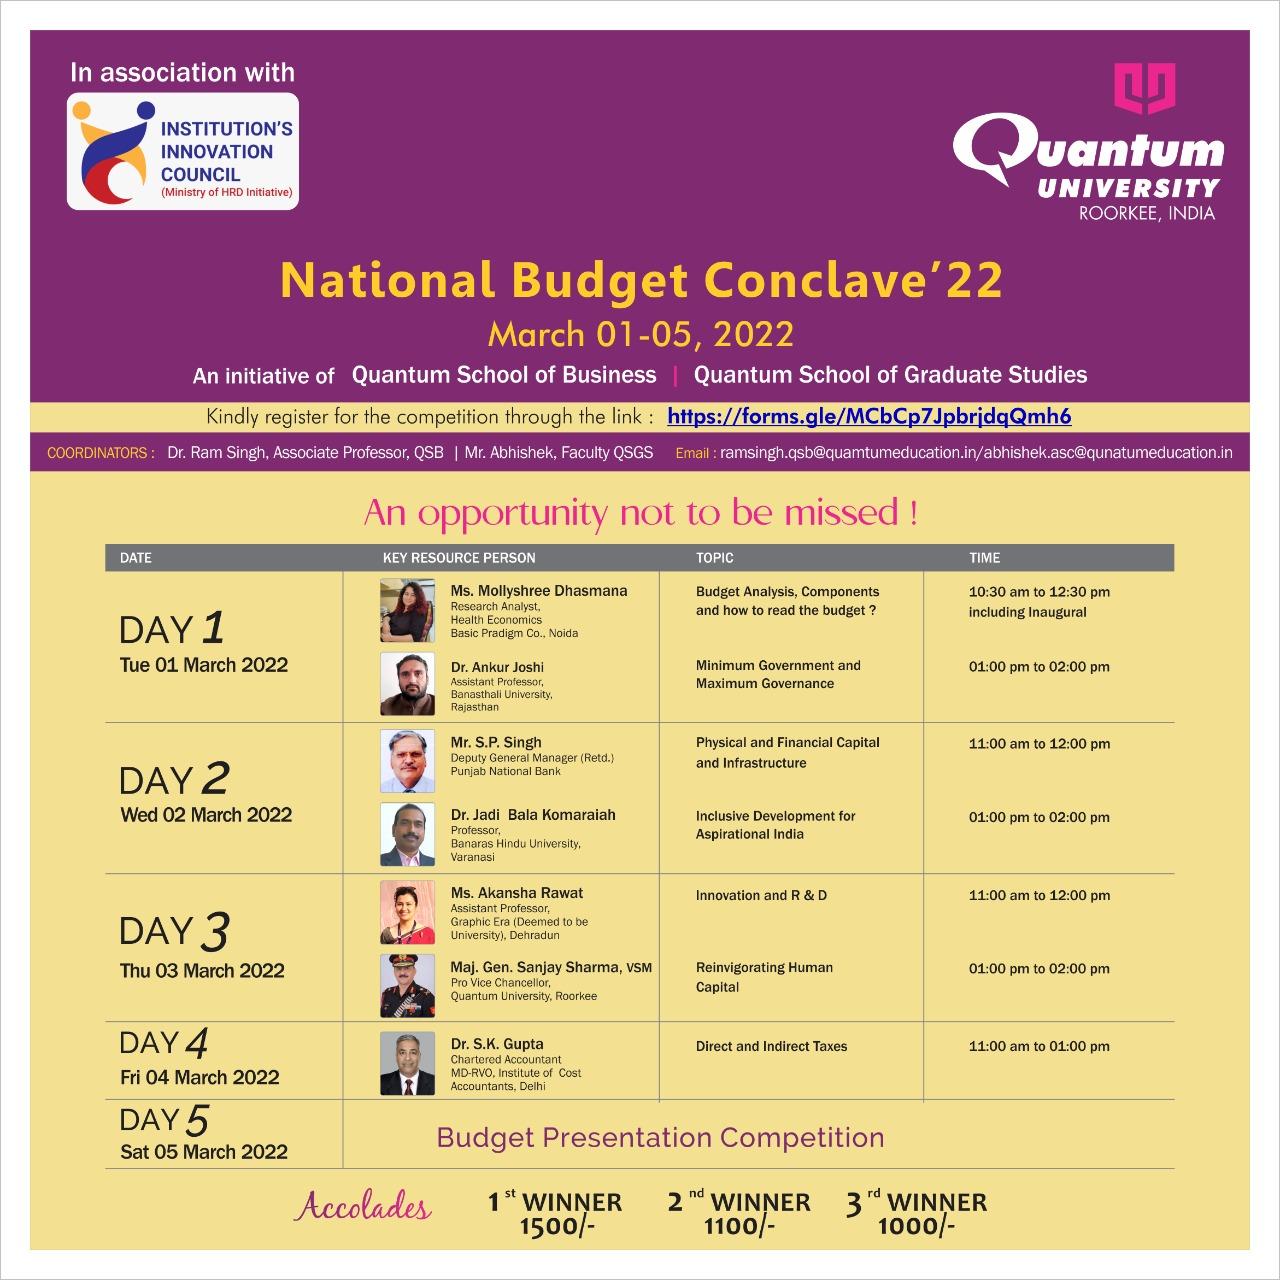 C:\Users\Administrator\Desktop\NEW DATA\EVENTS\BUDGET CONCLAVE MARCH 1\MAIN DAY\FINAL BUDGET FLYER.jpg